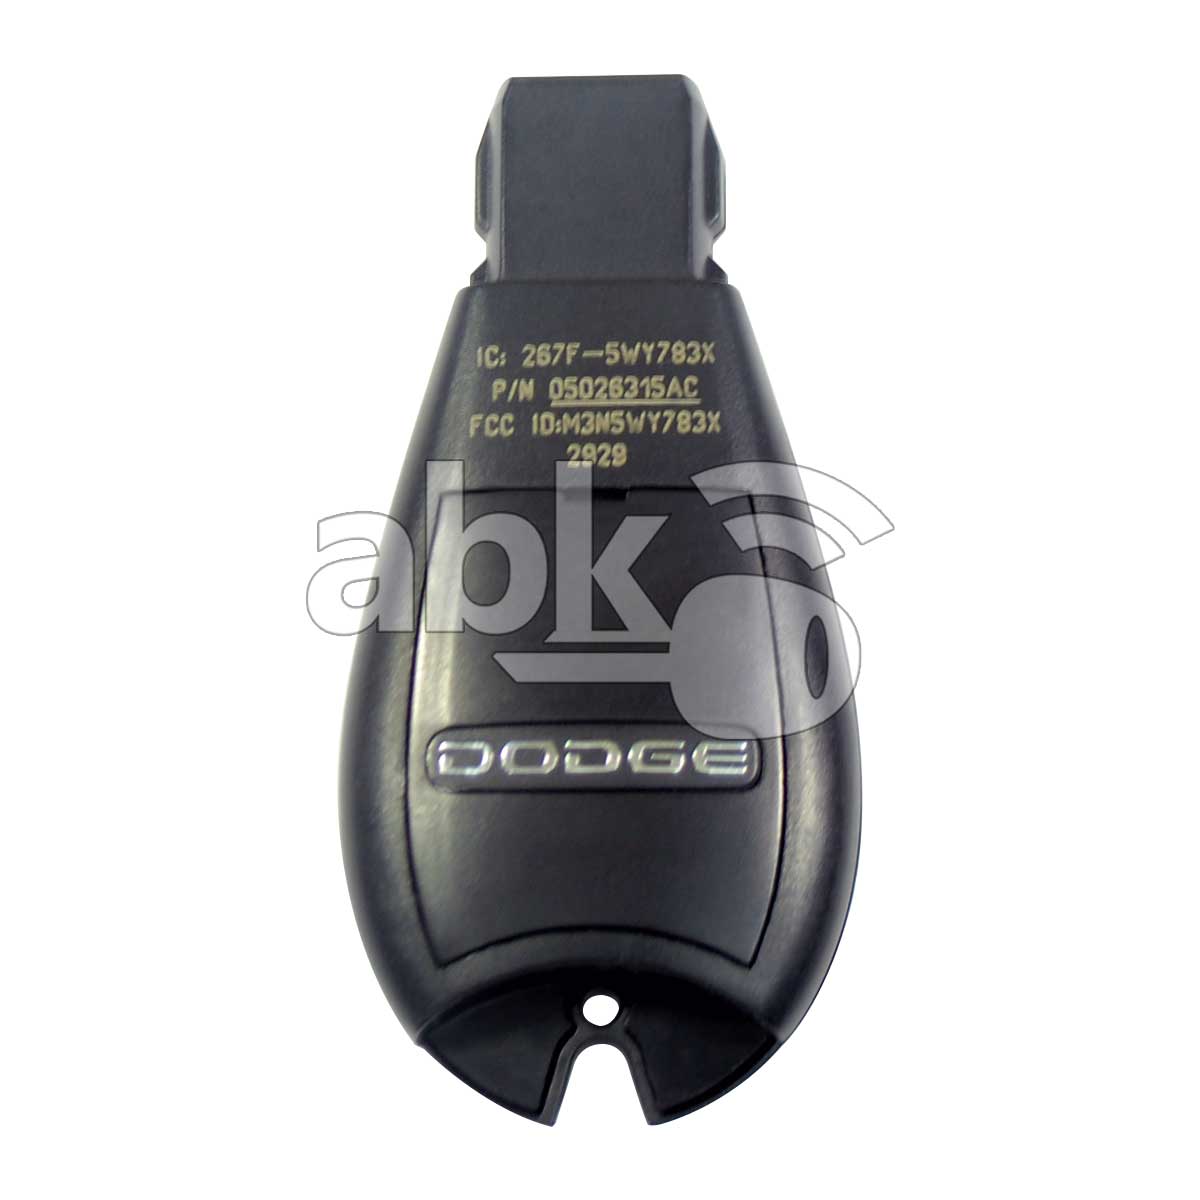 Genuine Dodge Charger Challenger Magnum 2008+ Fobik Key 4Buttons M3N5WY783X 433MHz 05026315AC - 